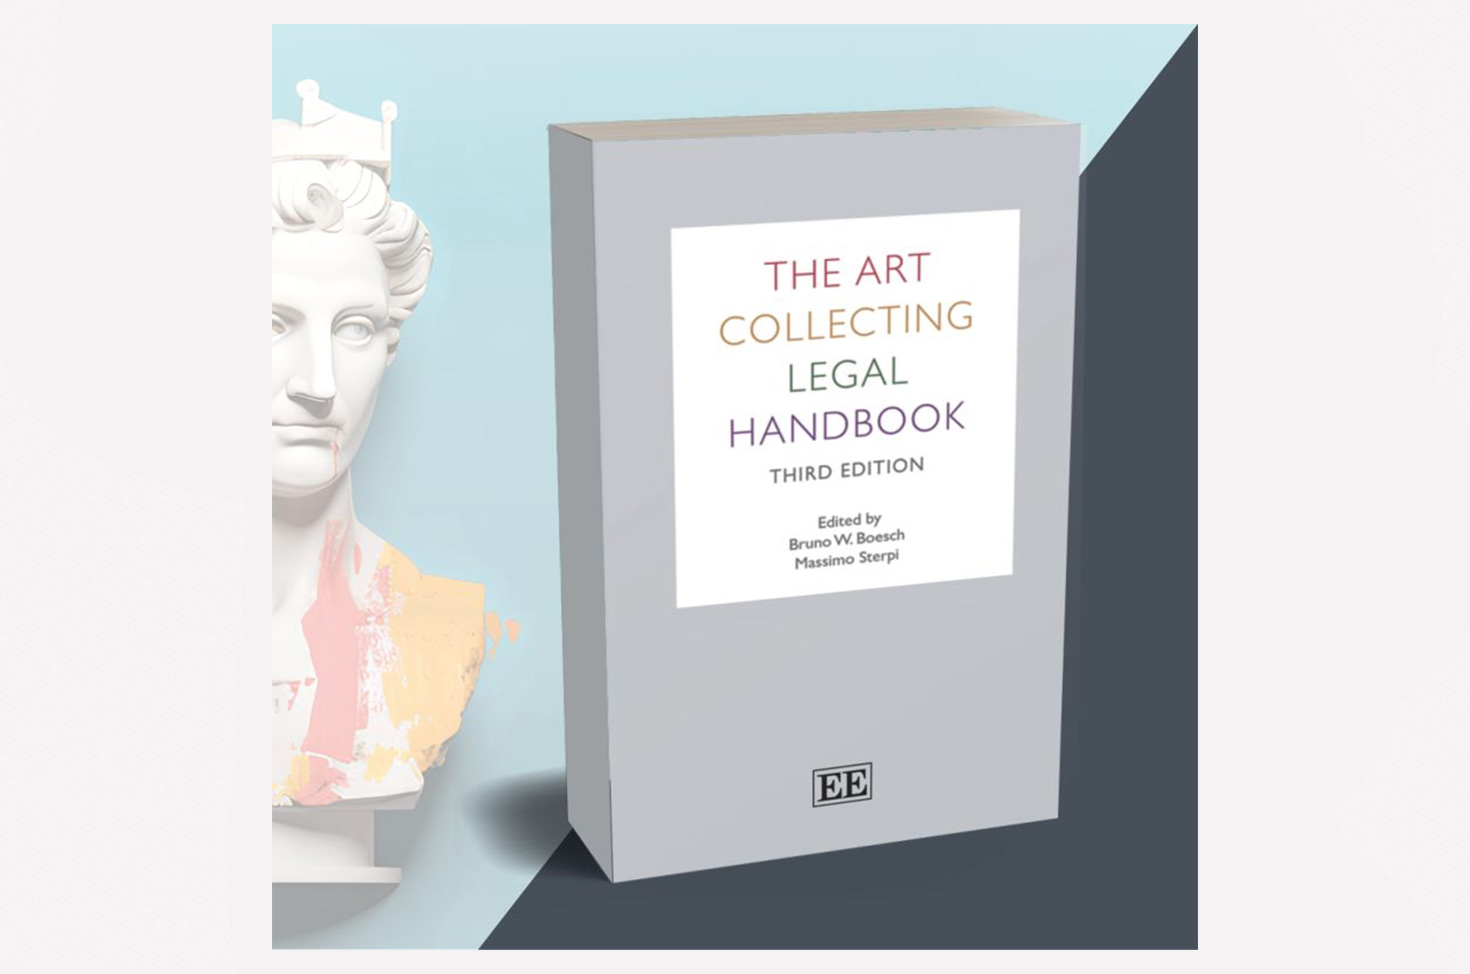 Book launch "The Art Collecting Legal Handbook, Third Edition"